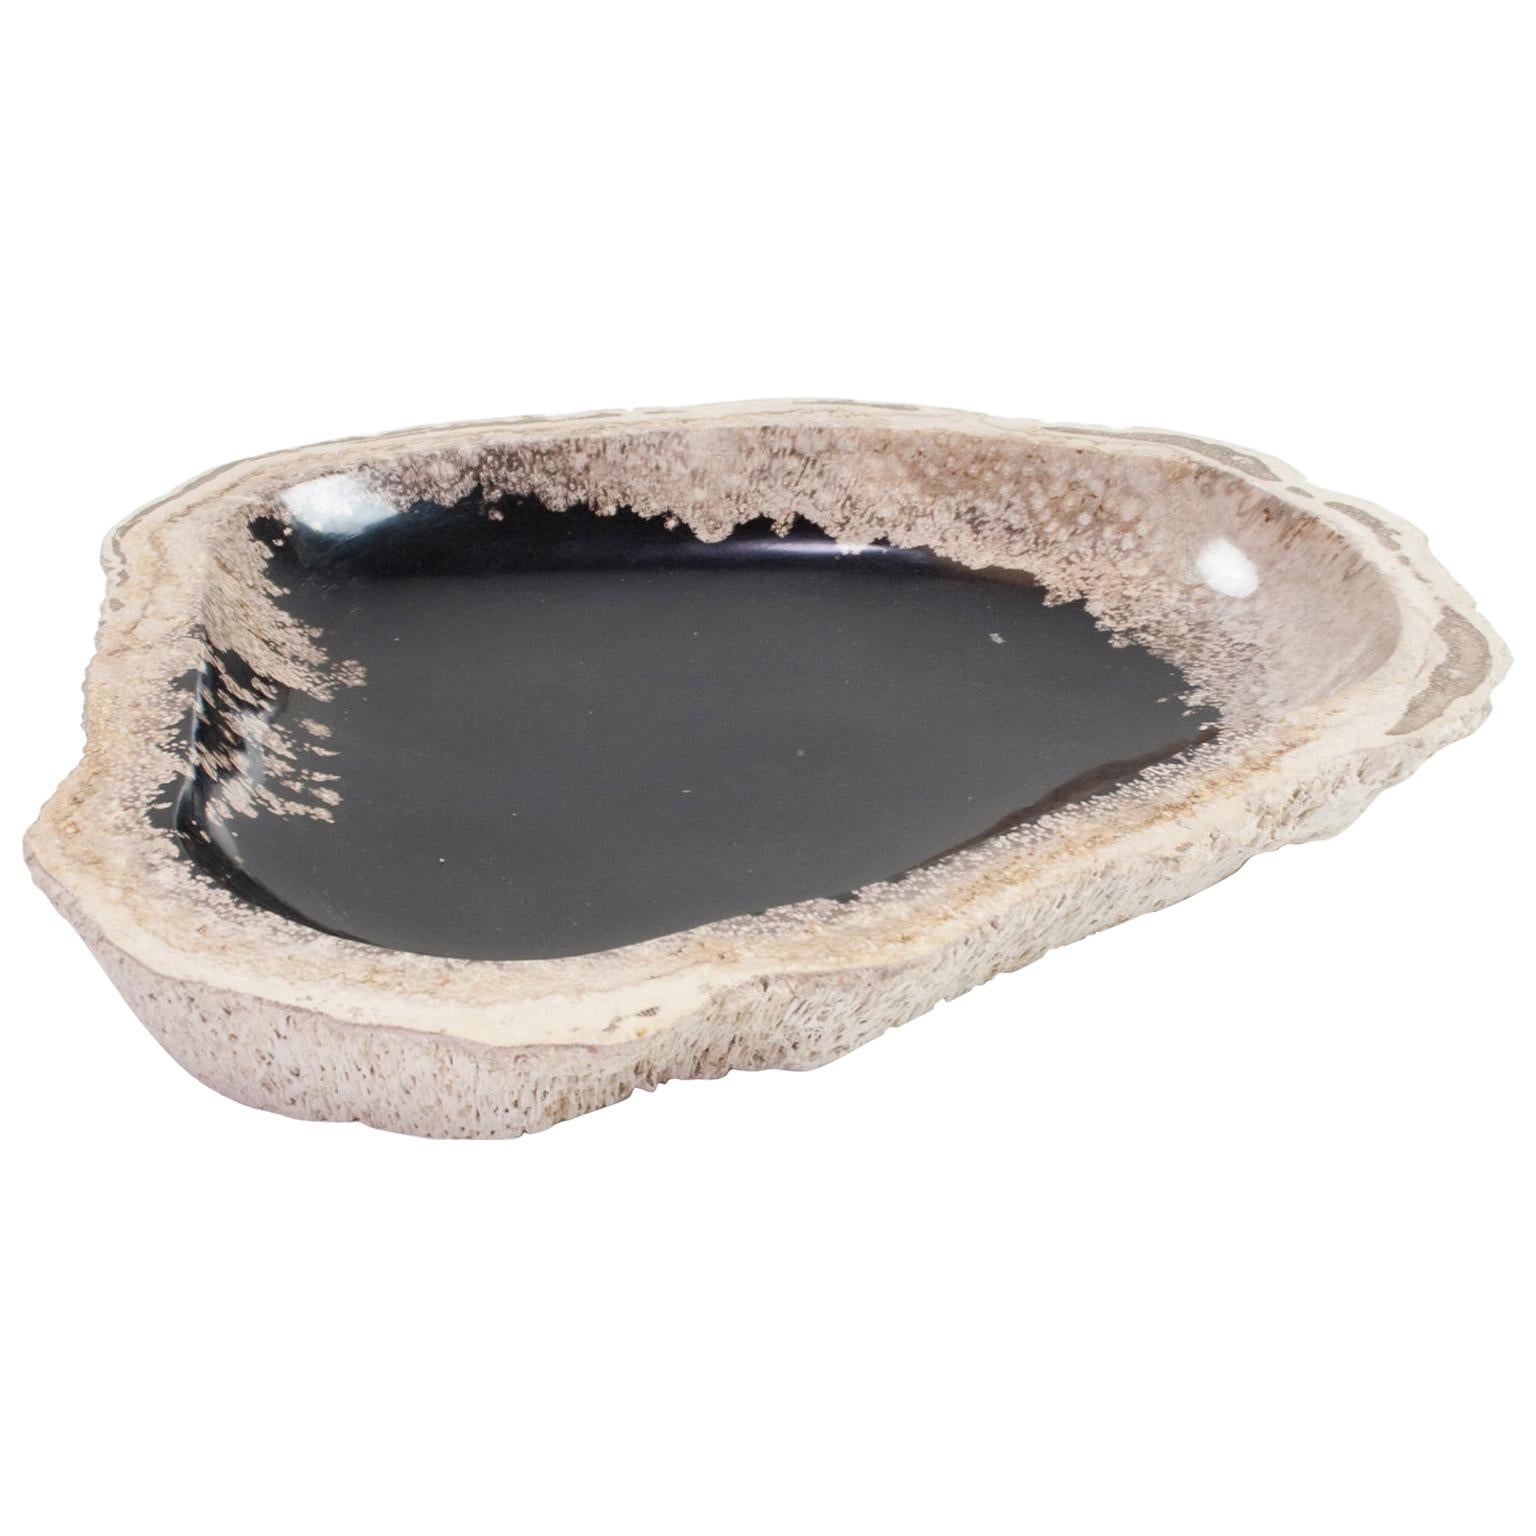 Petrified Wooden Bowl or Platter, Home Accessory of Organic Original